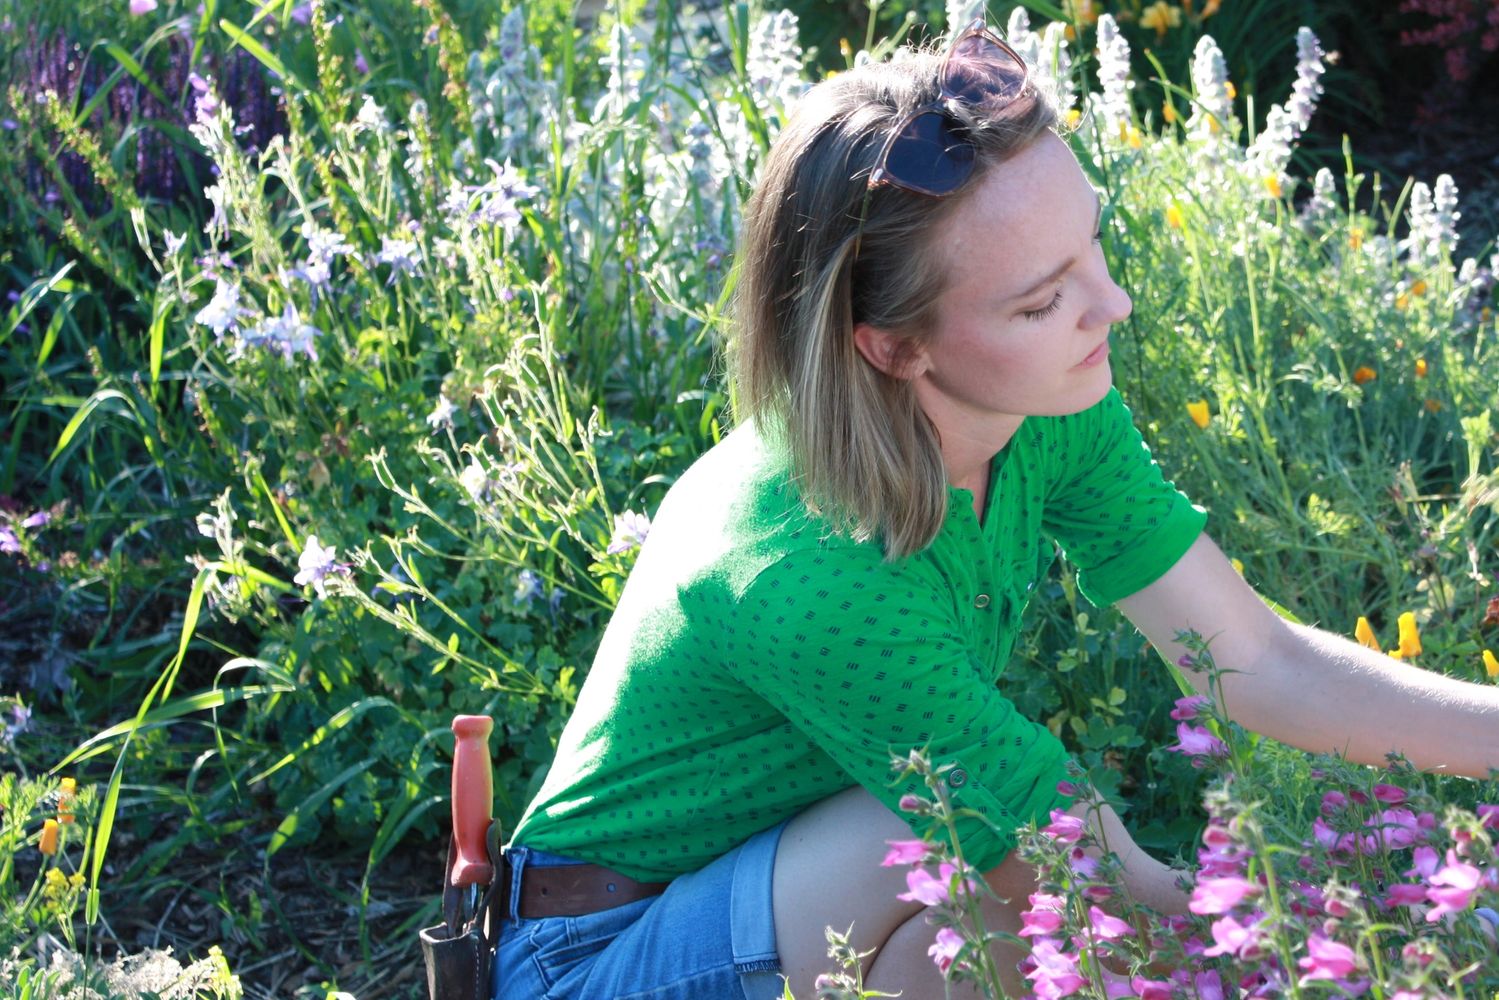 Professional horticulturist and Plant Health Consultant Sierra Laverty examines a garden in Idaho